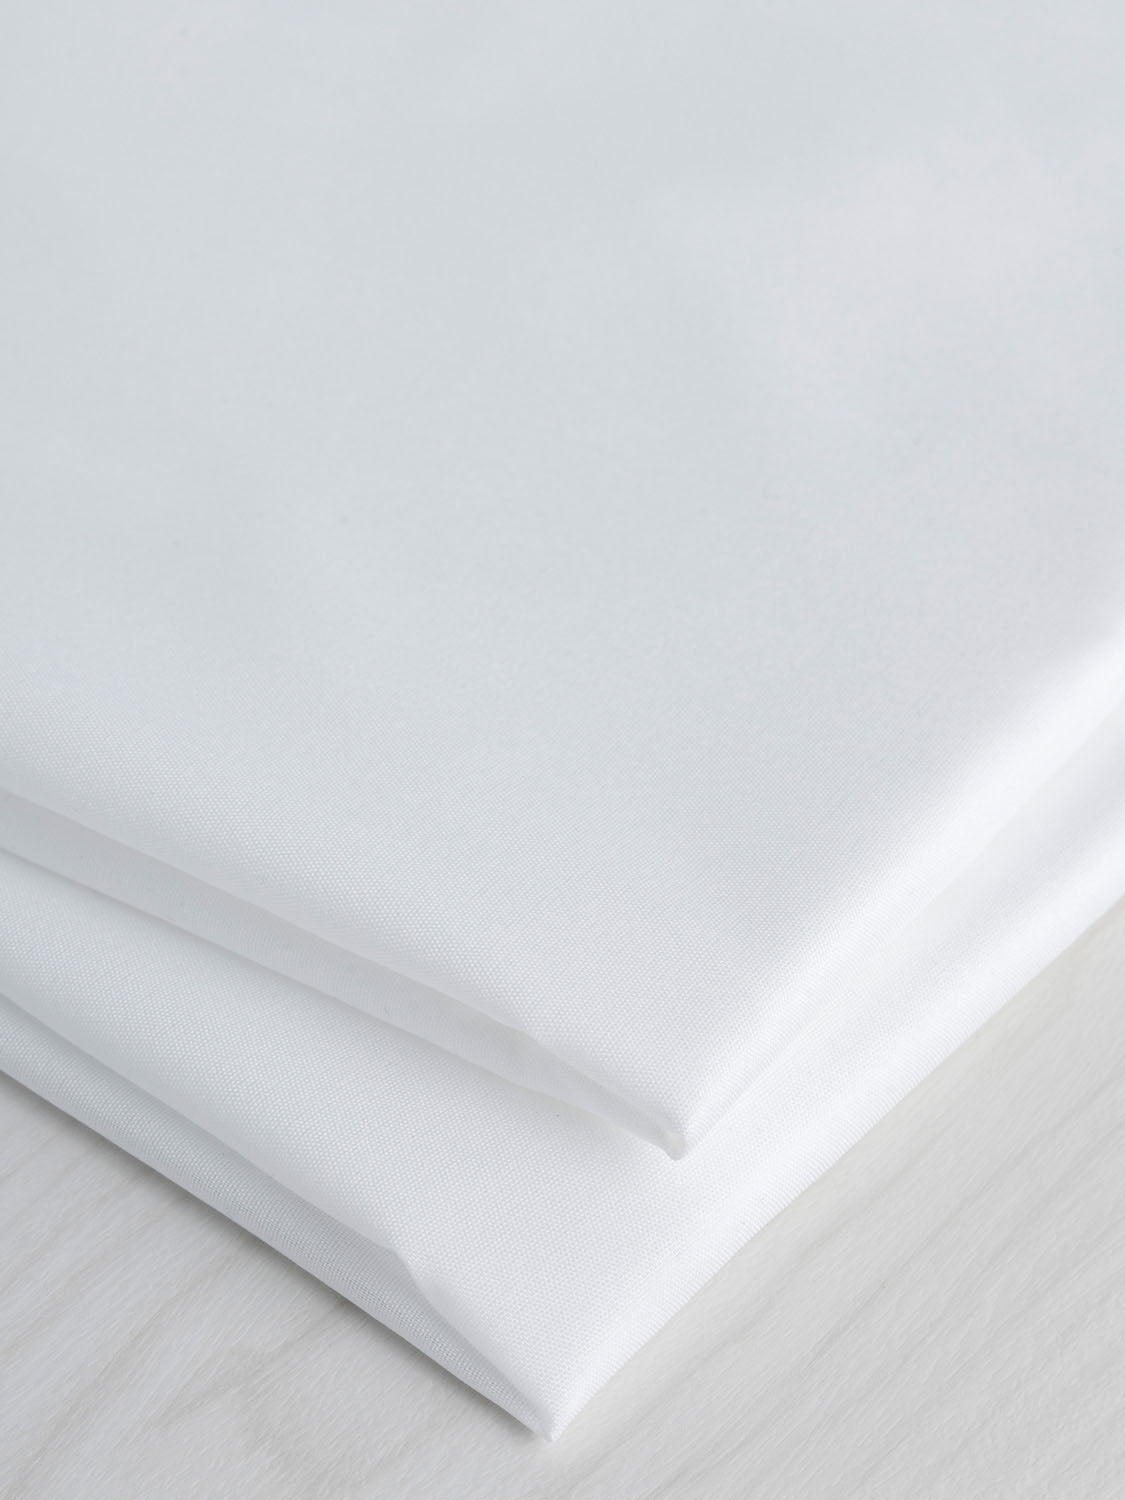 Lightweight Nonwoven Iron-On Fusible Interfacing: Meneng 40x3Yards White  Onesided Interlining Fabric for Sewing